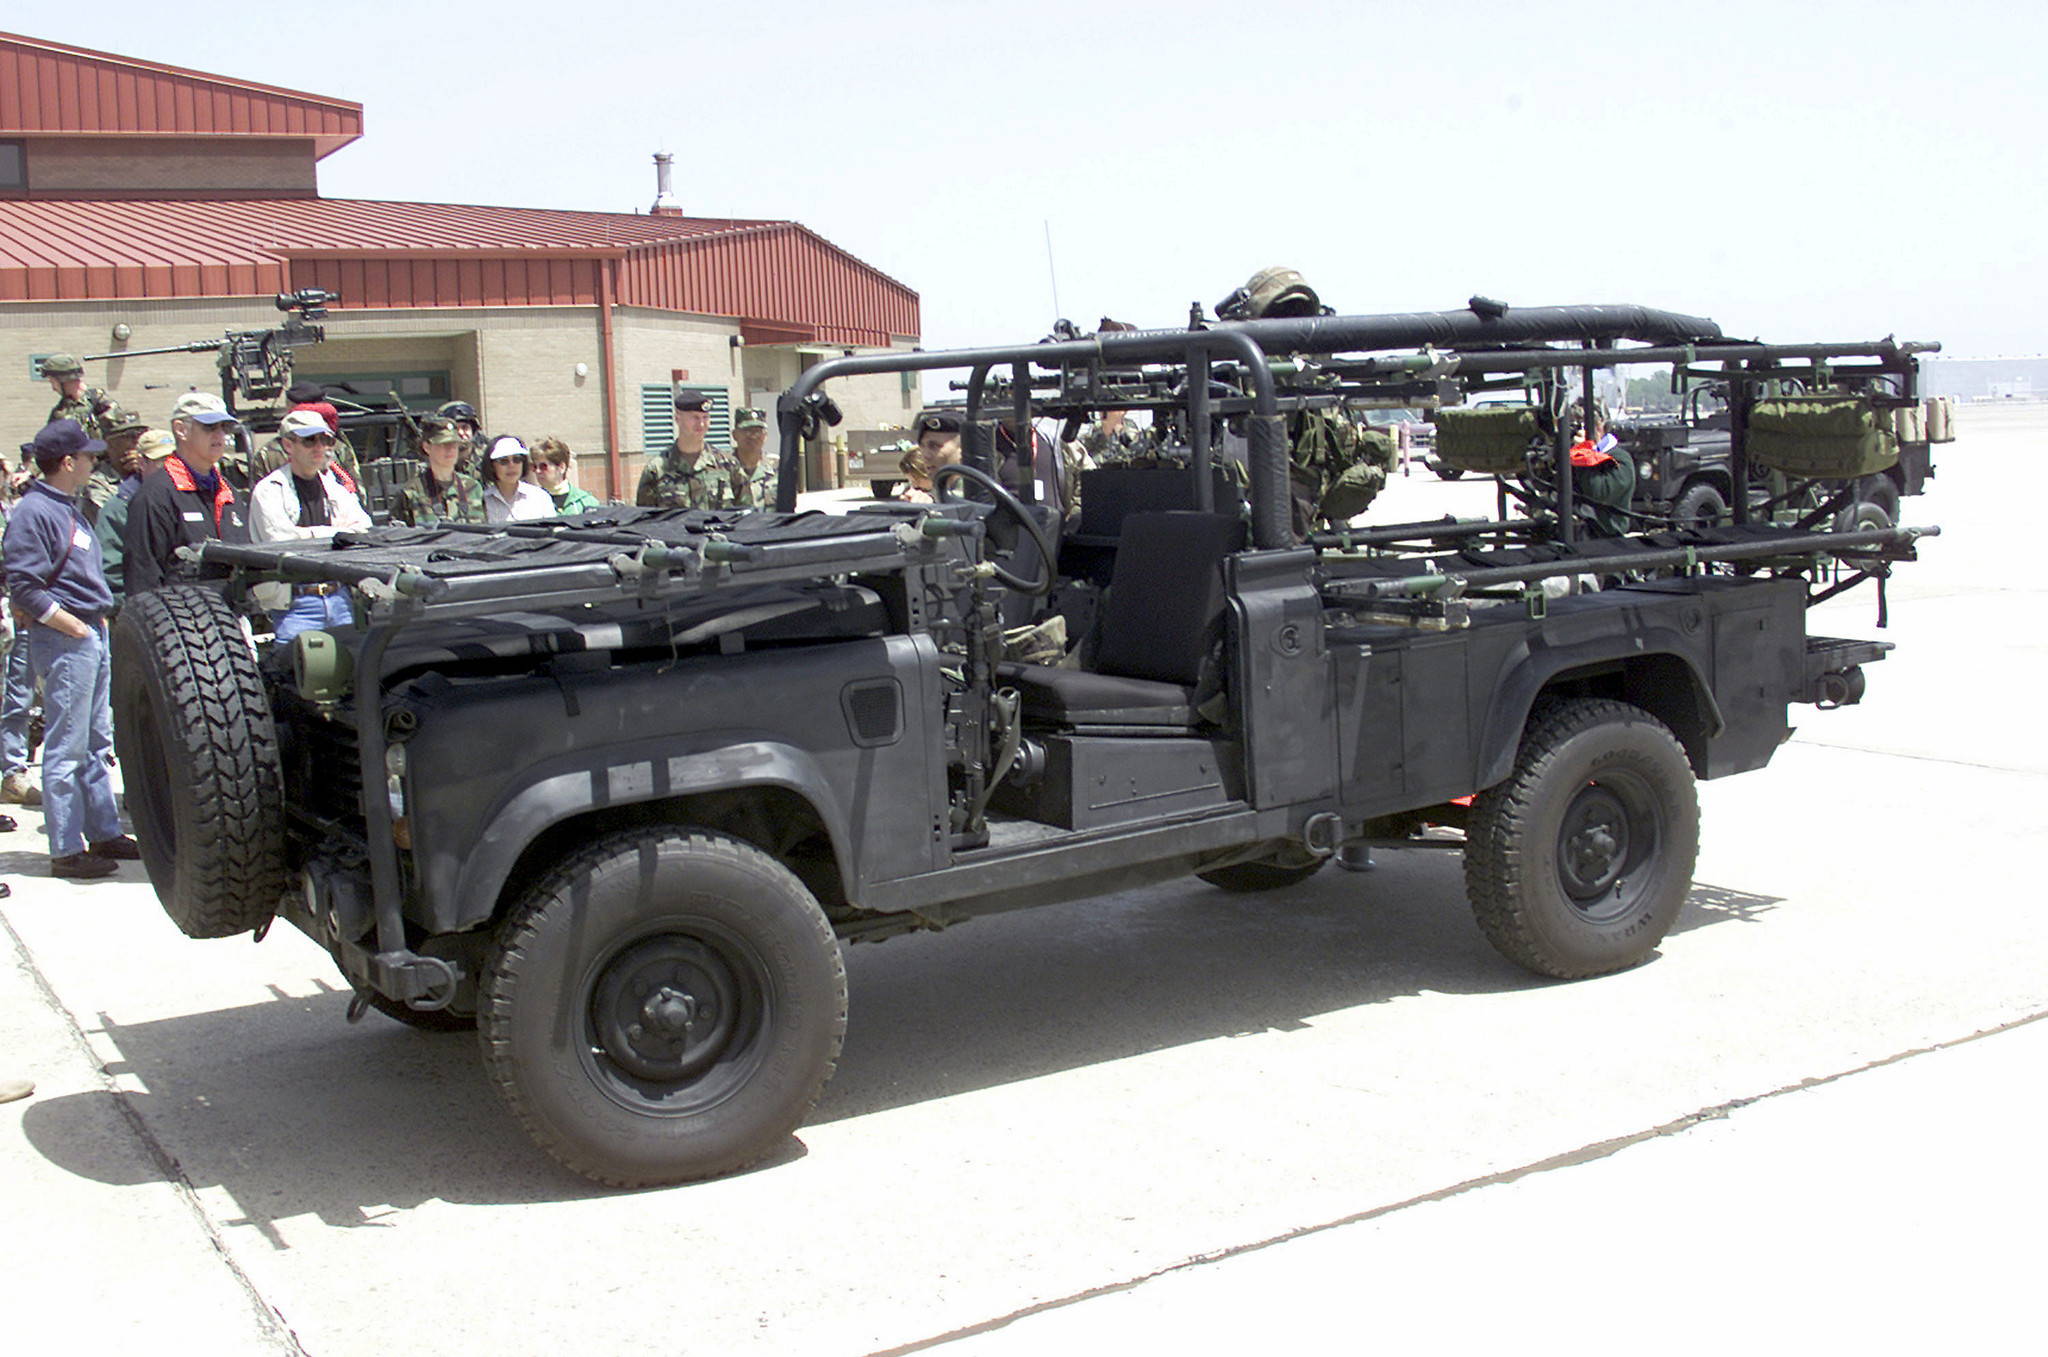 A U.S. Army Ranger MEDSOV (Medical Special Operations Vehicle) carries six patient litters, with two litters on hood and two litters stacked along each rear side, and is based on the British Land Rover Defender, on display from B Company, 1st Battalion, 75th Ranger Regiment, at the National War College, April 19, 2001.